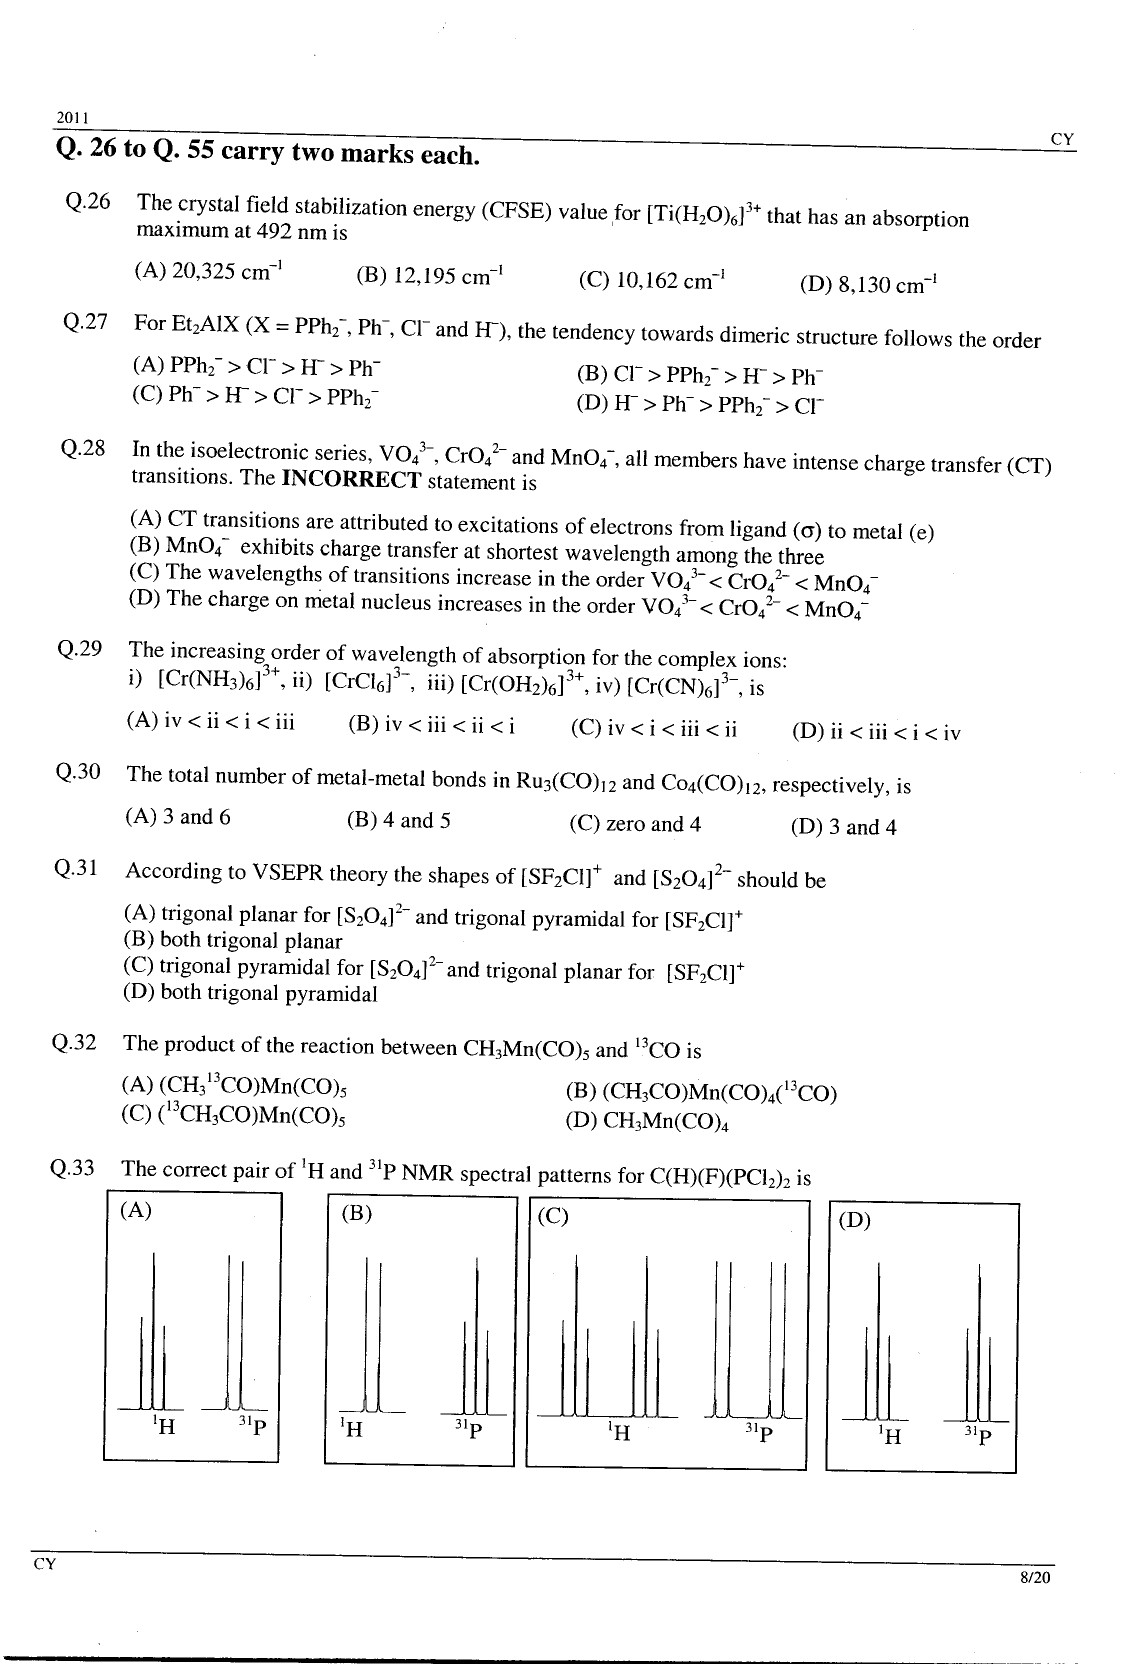 GATE Exam Question Paper 2011 Chemistry 8